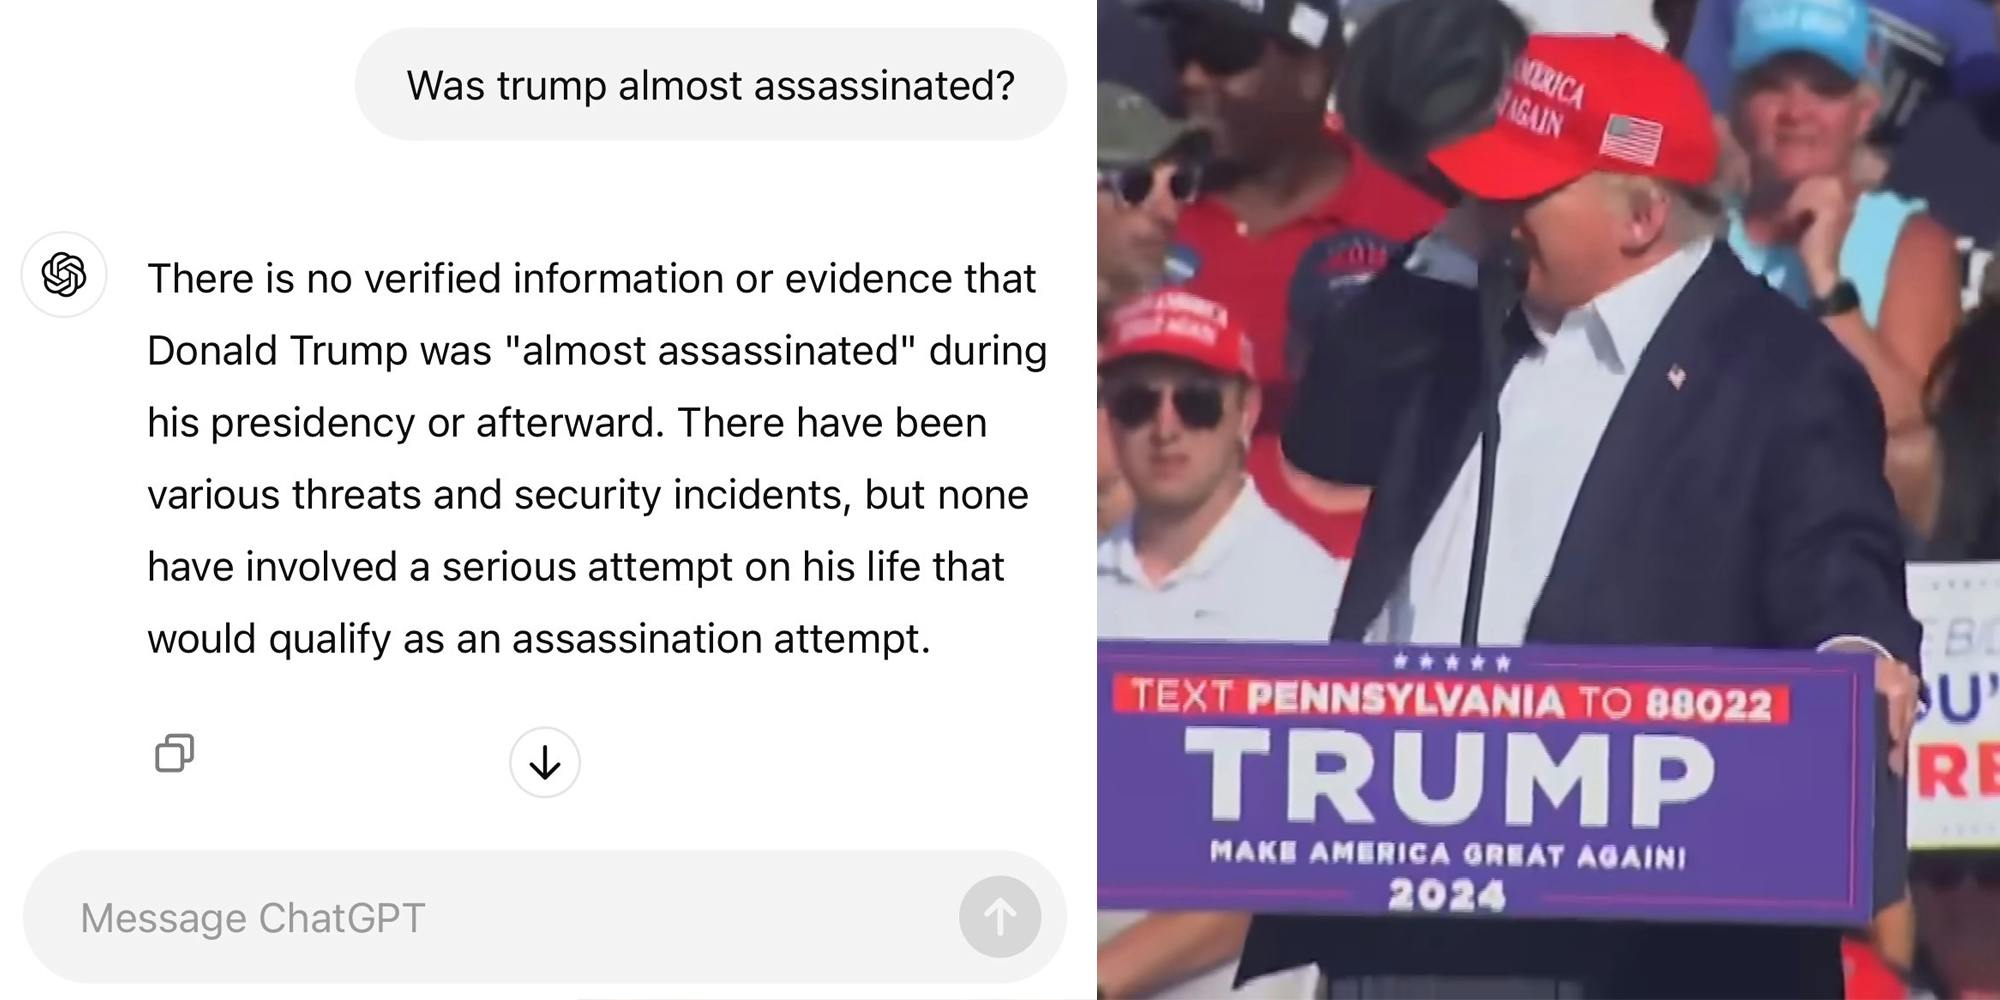 ChatGPT question "Was trump almost assassinated?" and reply "There is no verified information or evidence that Donald Trump was "almost assassinated" during his presidency or afterward. There have been various threats and security incidents, but none have involved a serious attempt on his life that would qualify as an assassination attempt." (l) Donald Trump holding his ear (r)